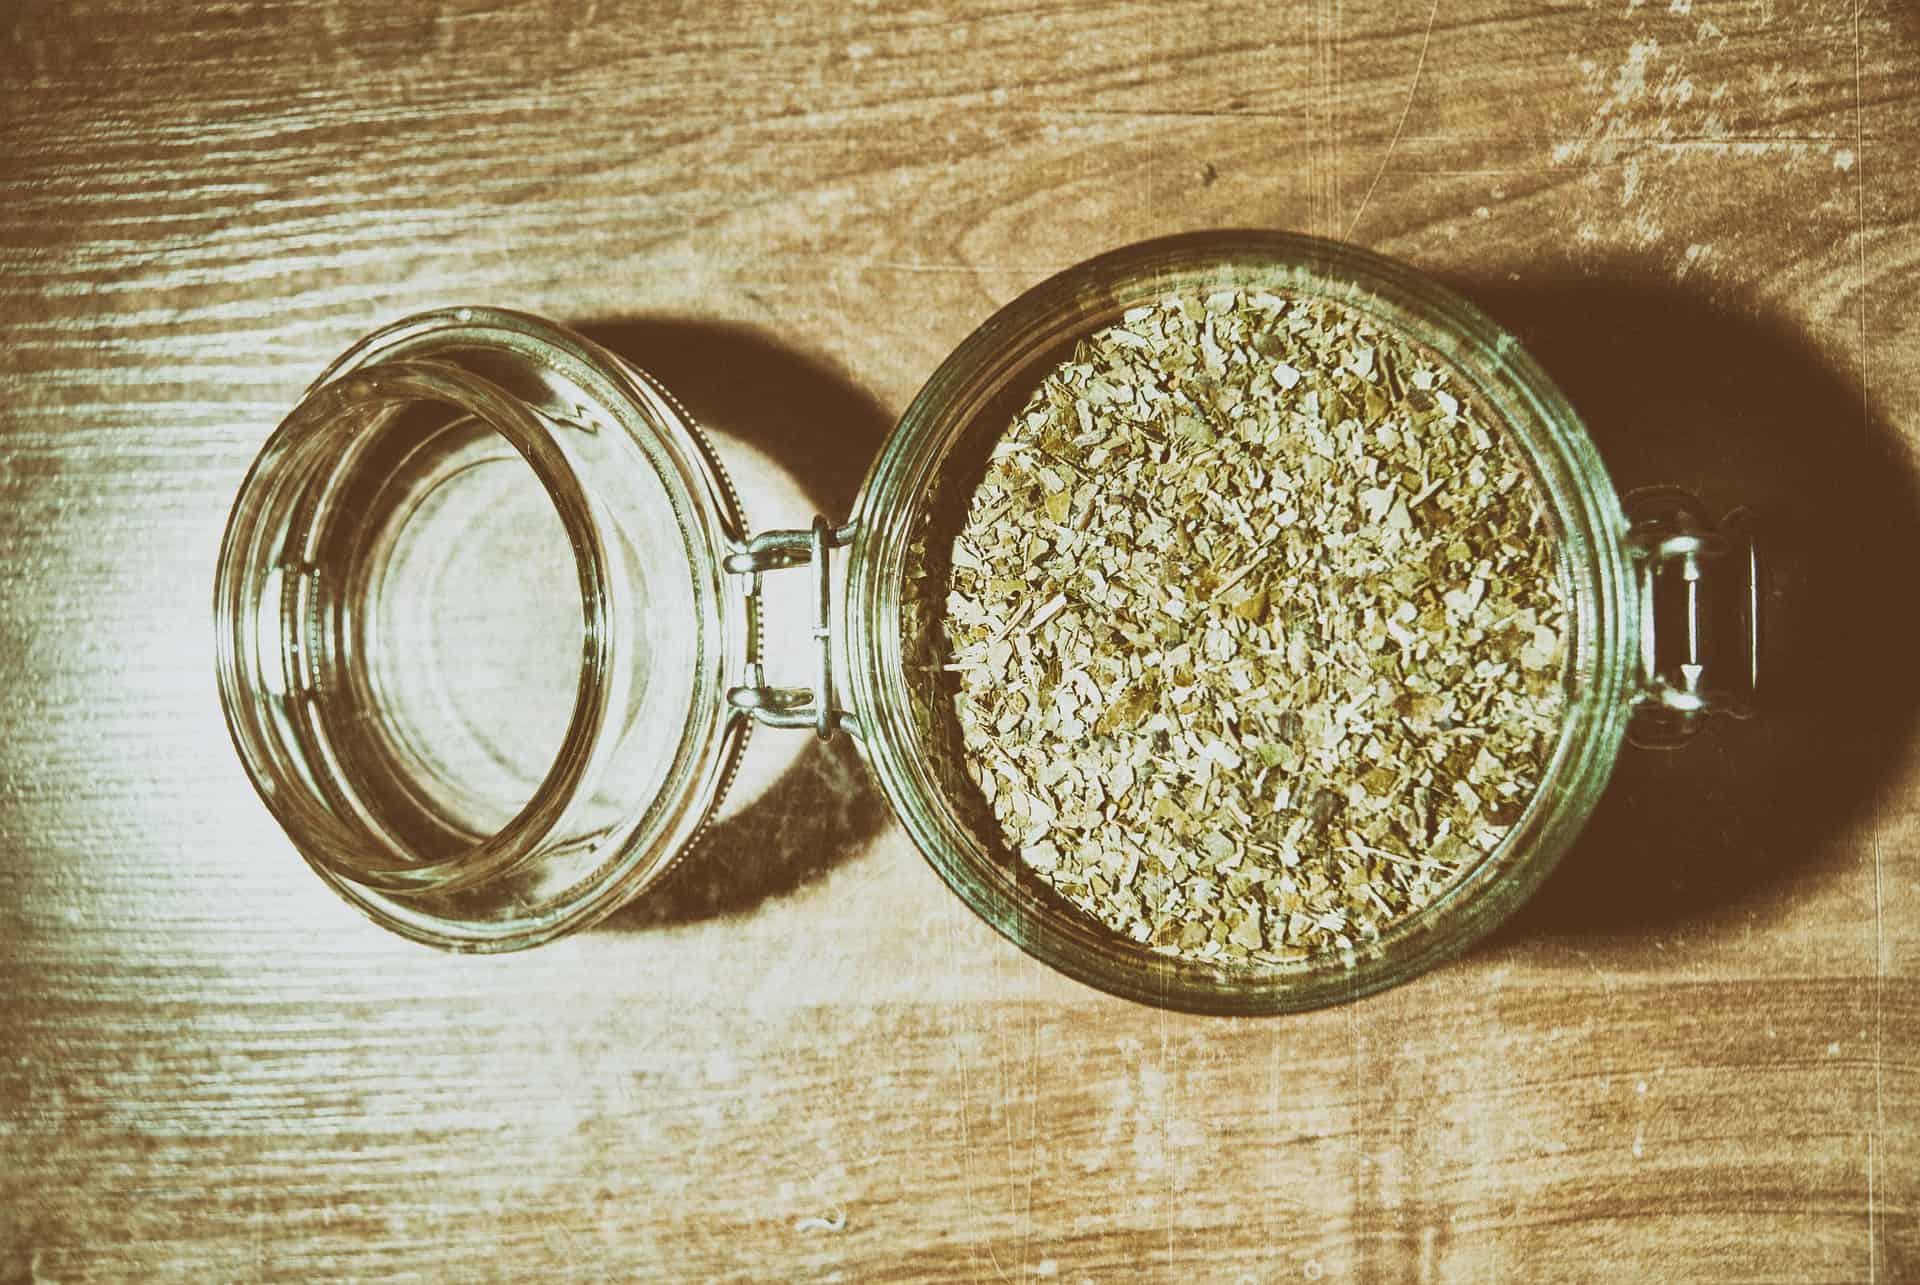 What Are The Benefits Of Yerba Mate - My Tea Vault